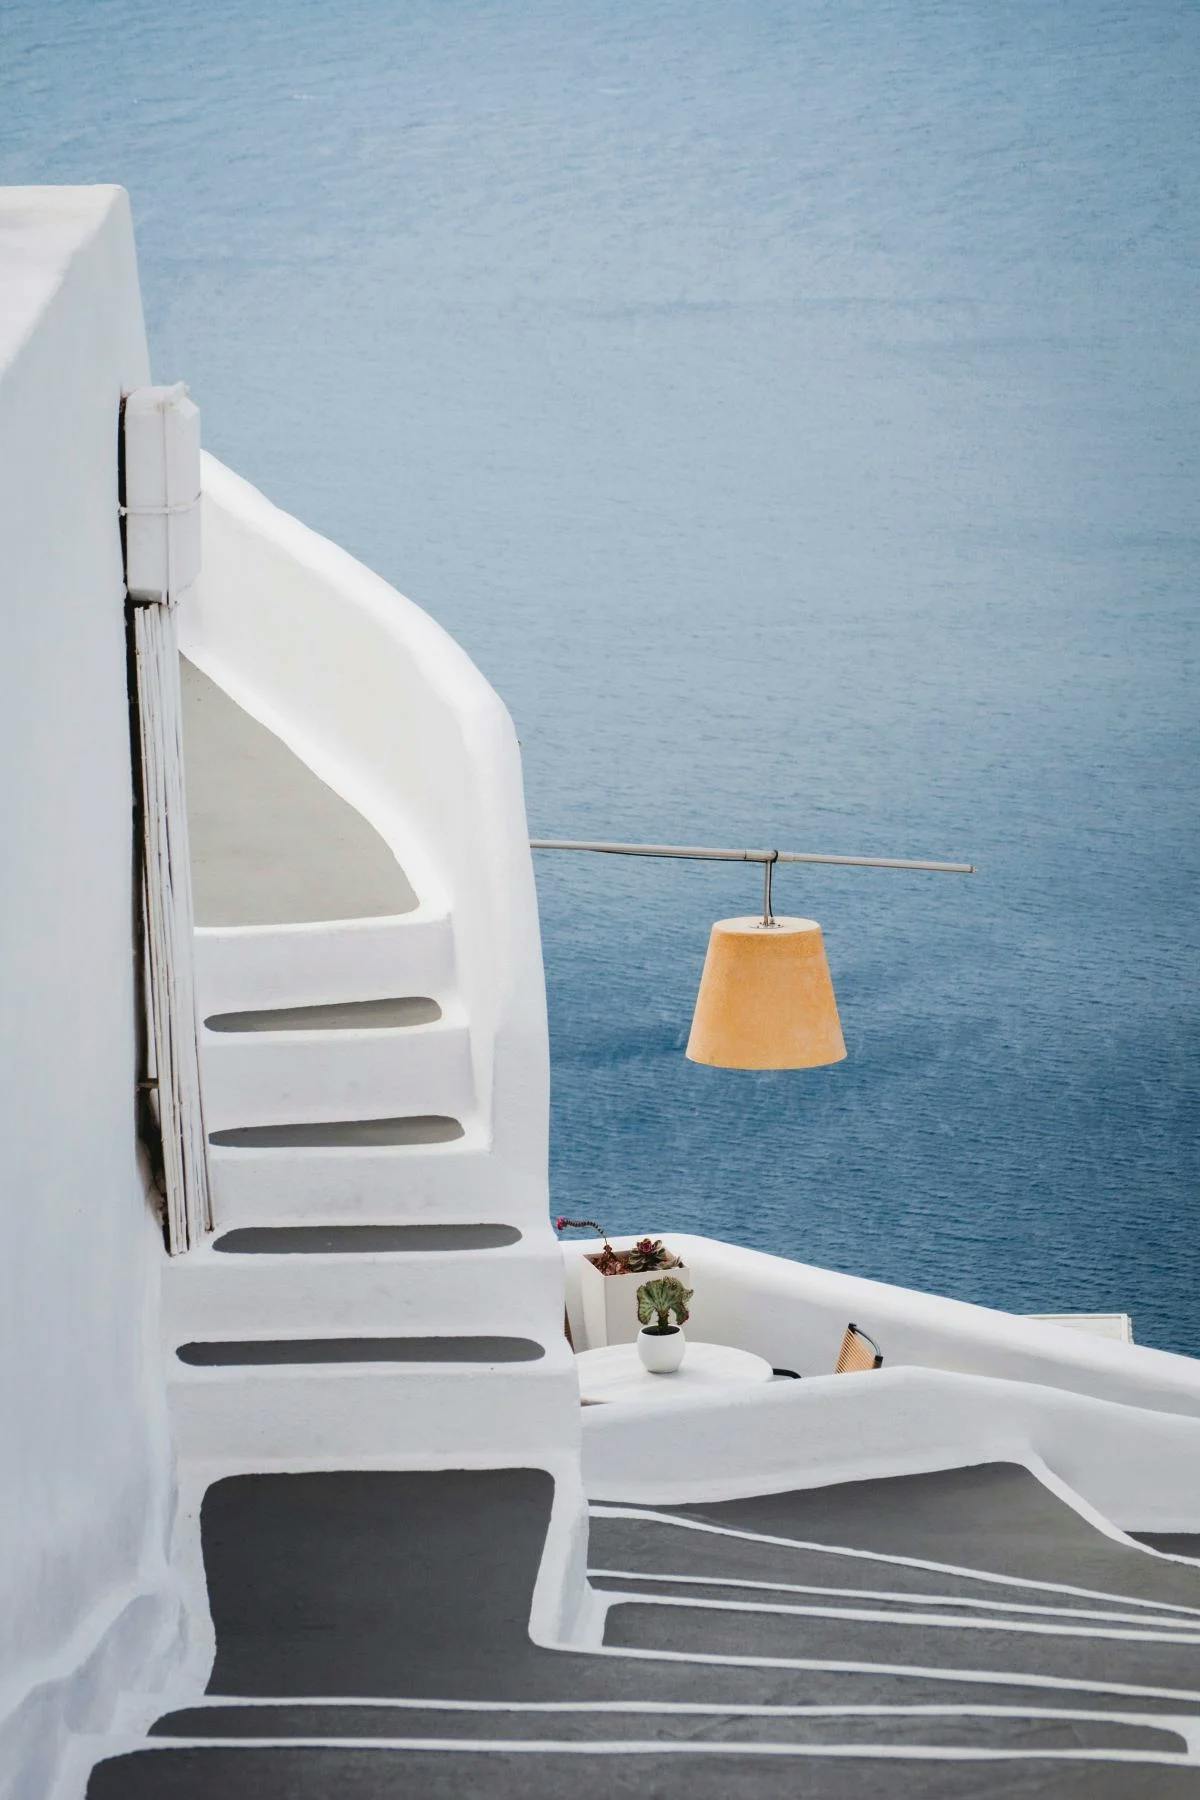 white staircase overlooking the sea